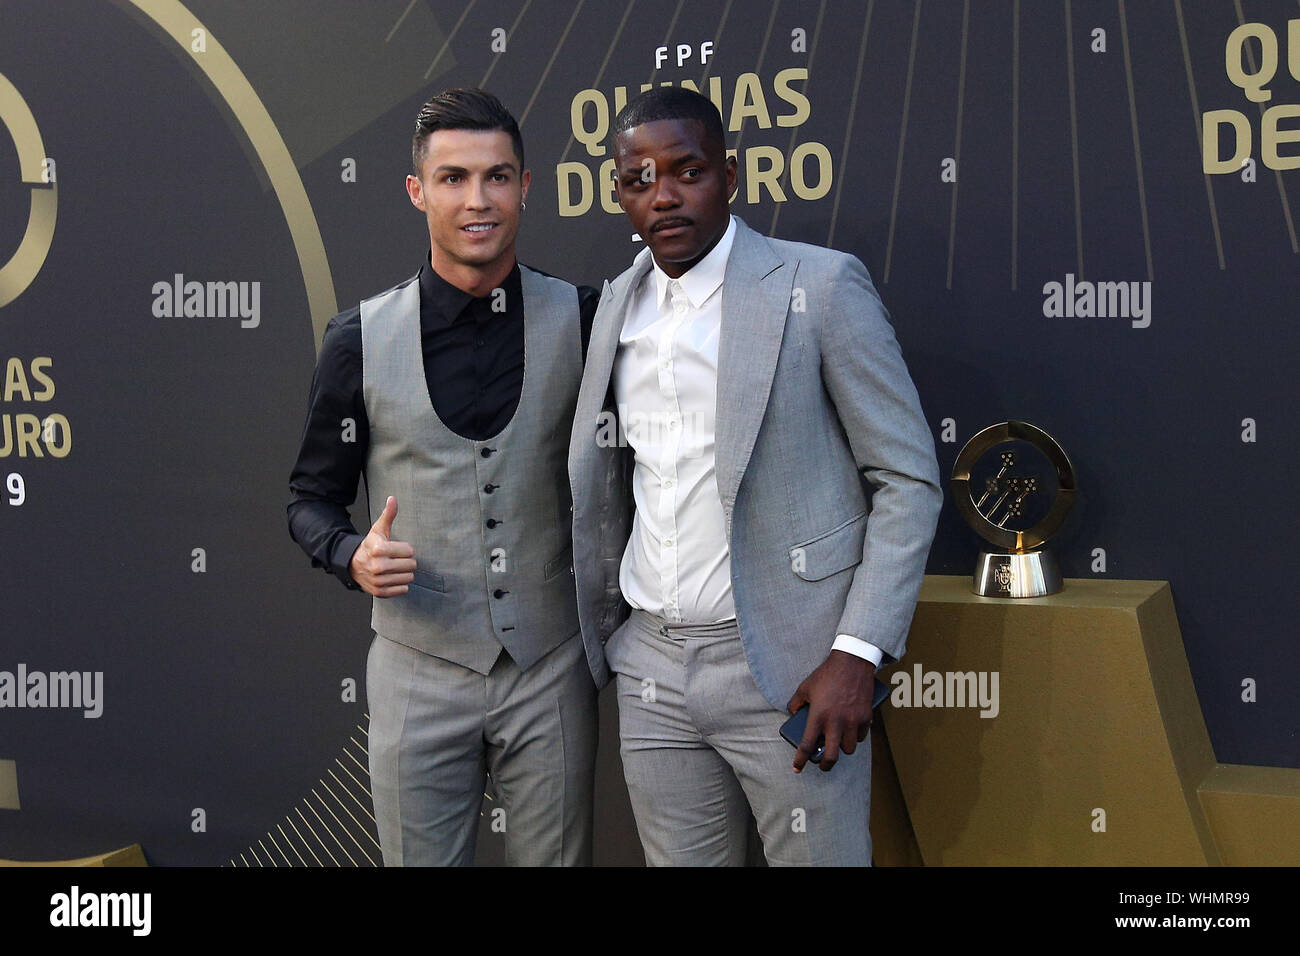 Lisbon, Portugal. 2nd Sep, 2019. Portugal's forward Cristiano Ronaldo (L) and Portugal's midfielder William de Carvalho arrive for the Portuguese Football Federation 'Quinas de Ouro 2019' awards ceremony at Carlos Lopes hall in Lisbon, Portugal, on Sept. 2, 2019. Credit: Pedro Fiuza/Xinhua Credit: Xinhua/Alamy Live News Stock Photo